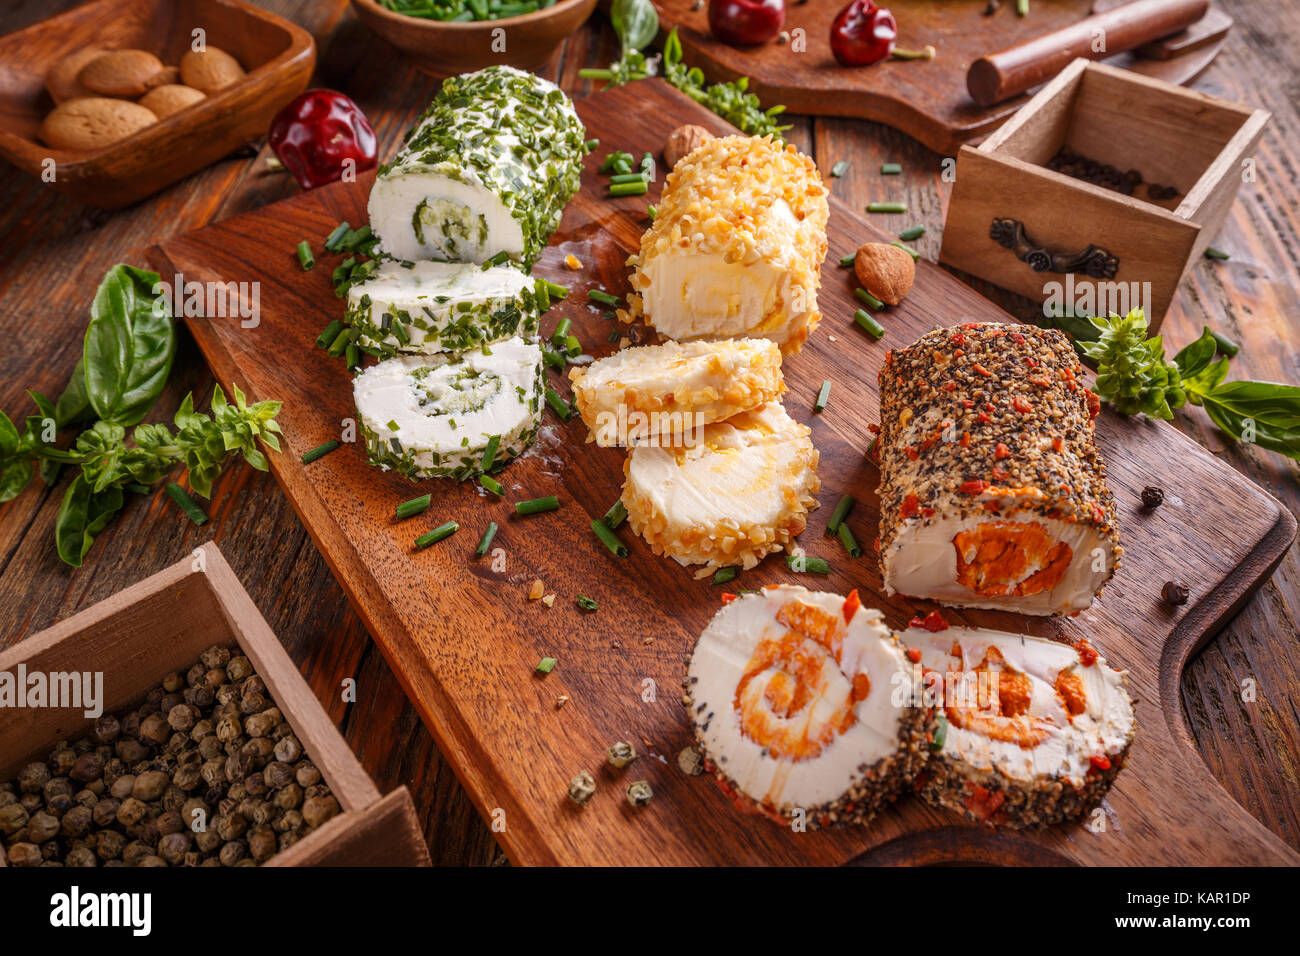 Cottage cheese with colorful stuffing on wooden cutting board Stock Photo